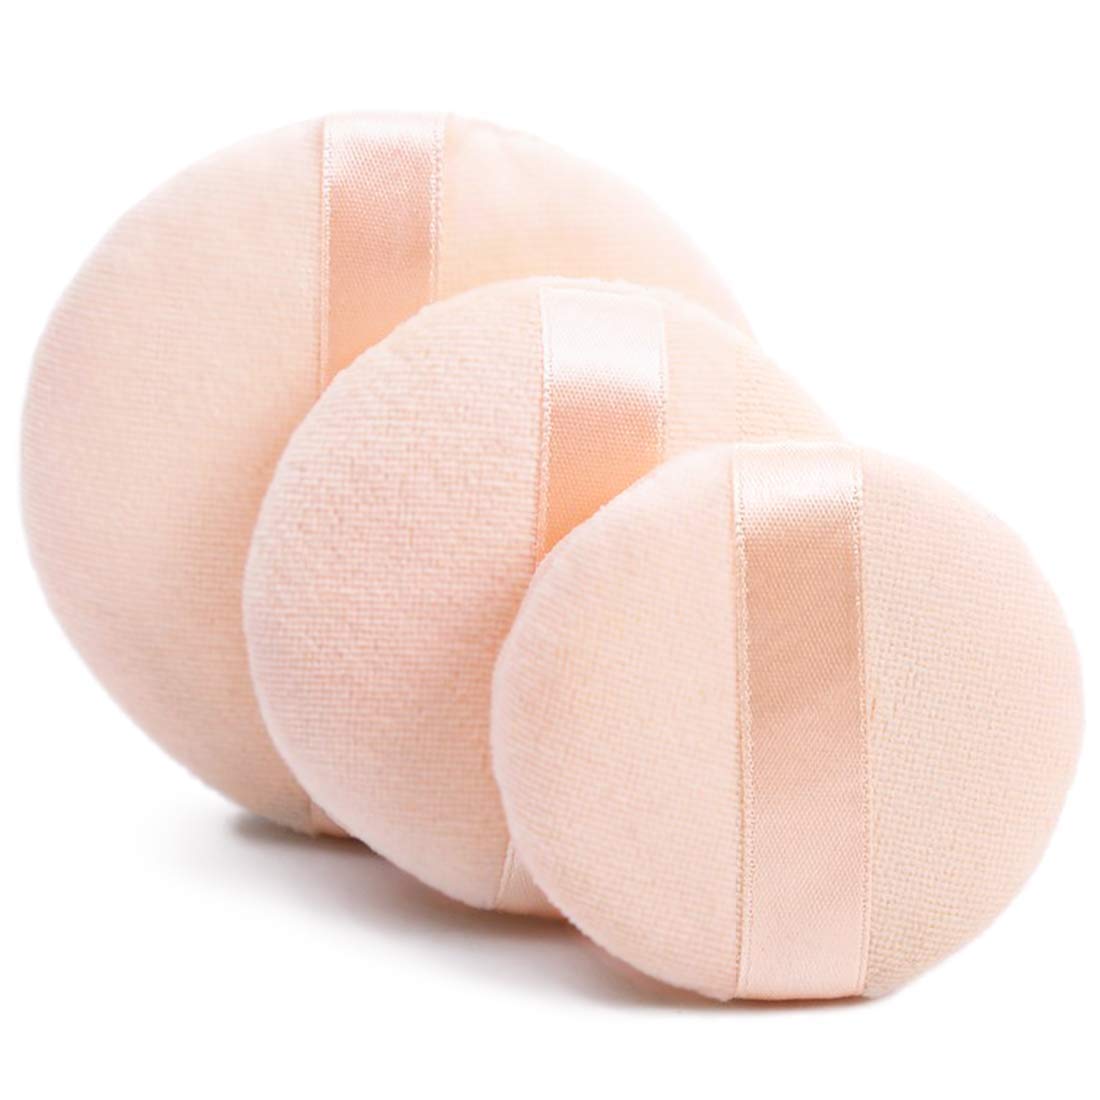 Velour Puffs - Products for Makeup Artists